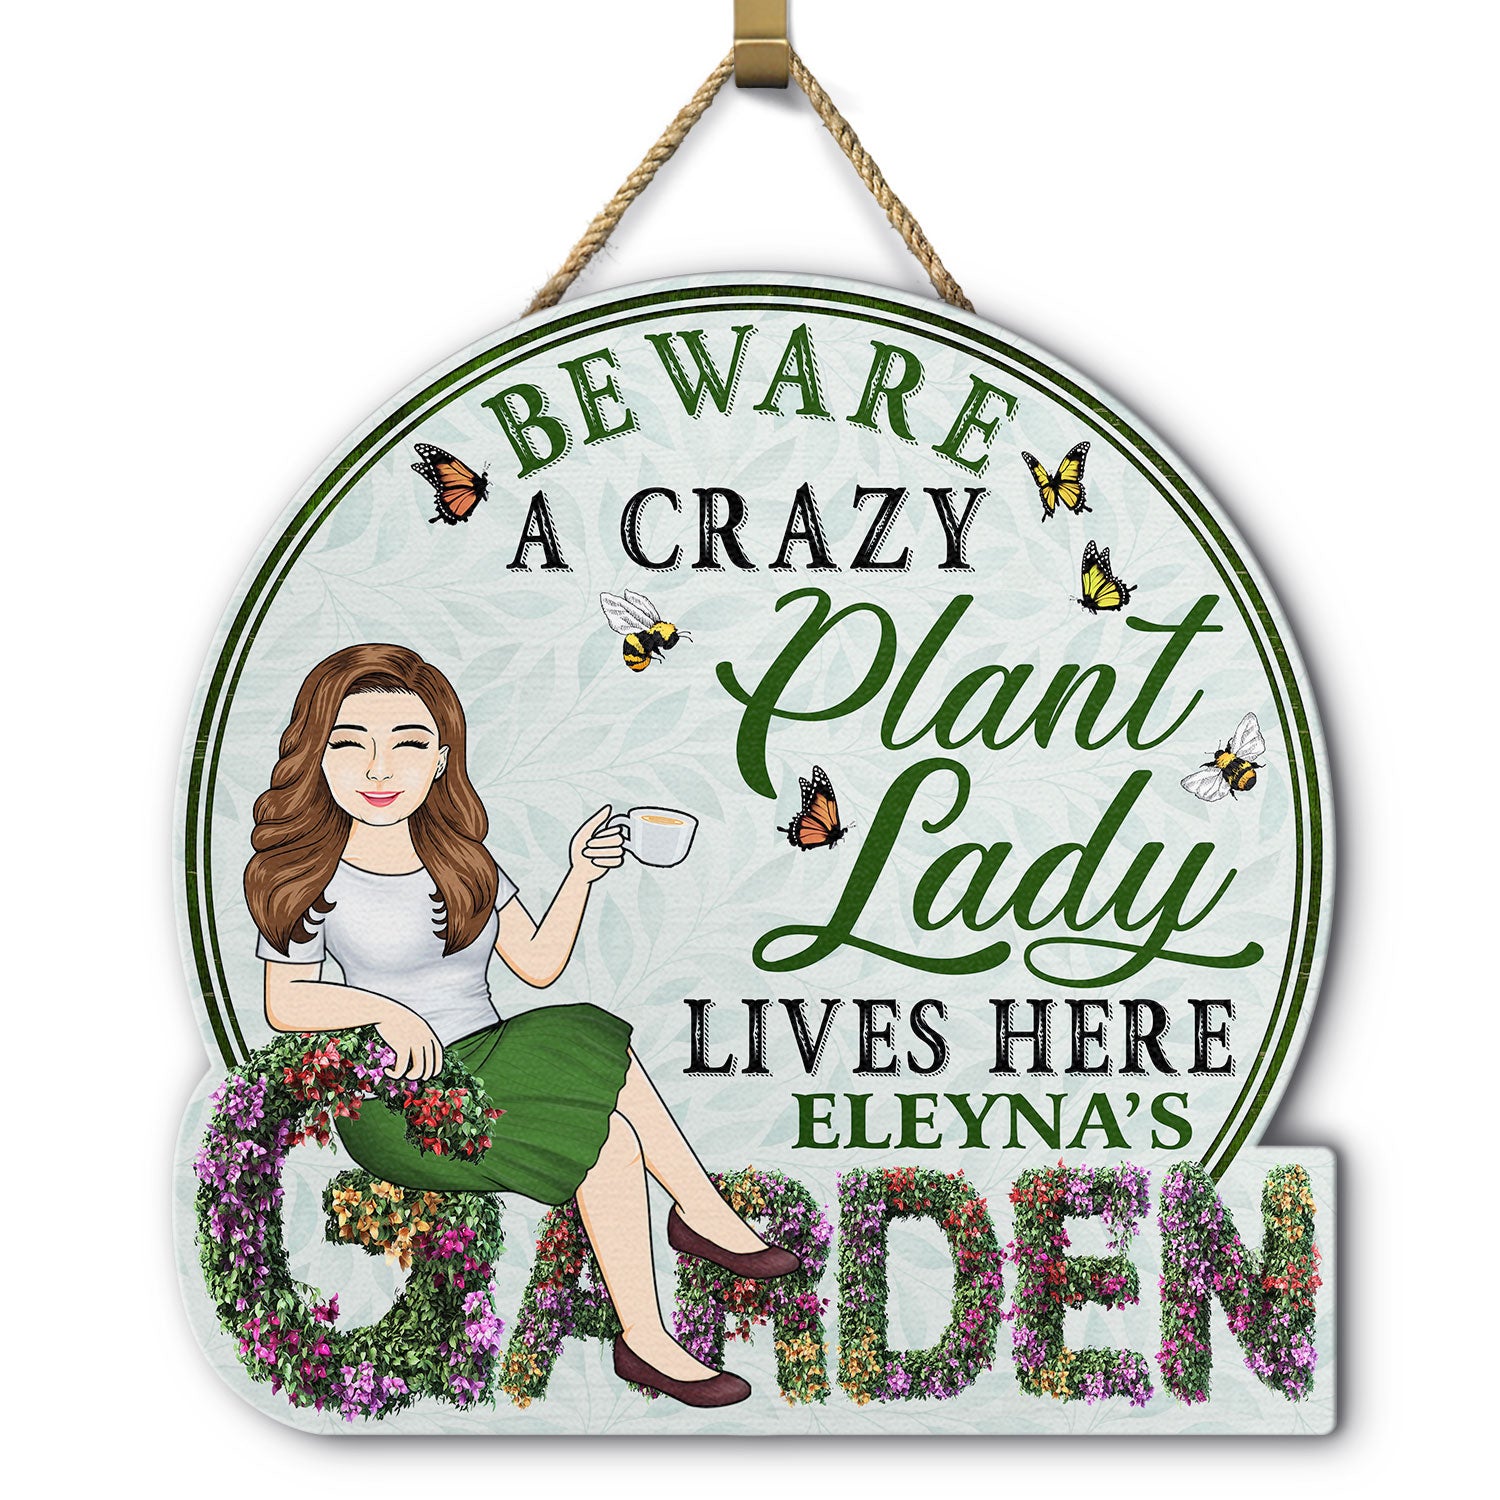 Beware A Crazy Plant Lady Lives Here - And Into The Garden I Go - Birthday, Housewarming Gift For Her, Him, Gardener, Outdoor Decor - Personalized Custom Shaped Wood Sign